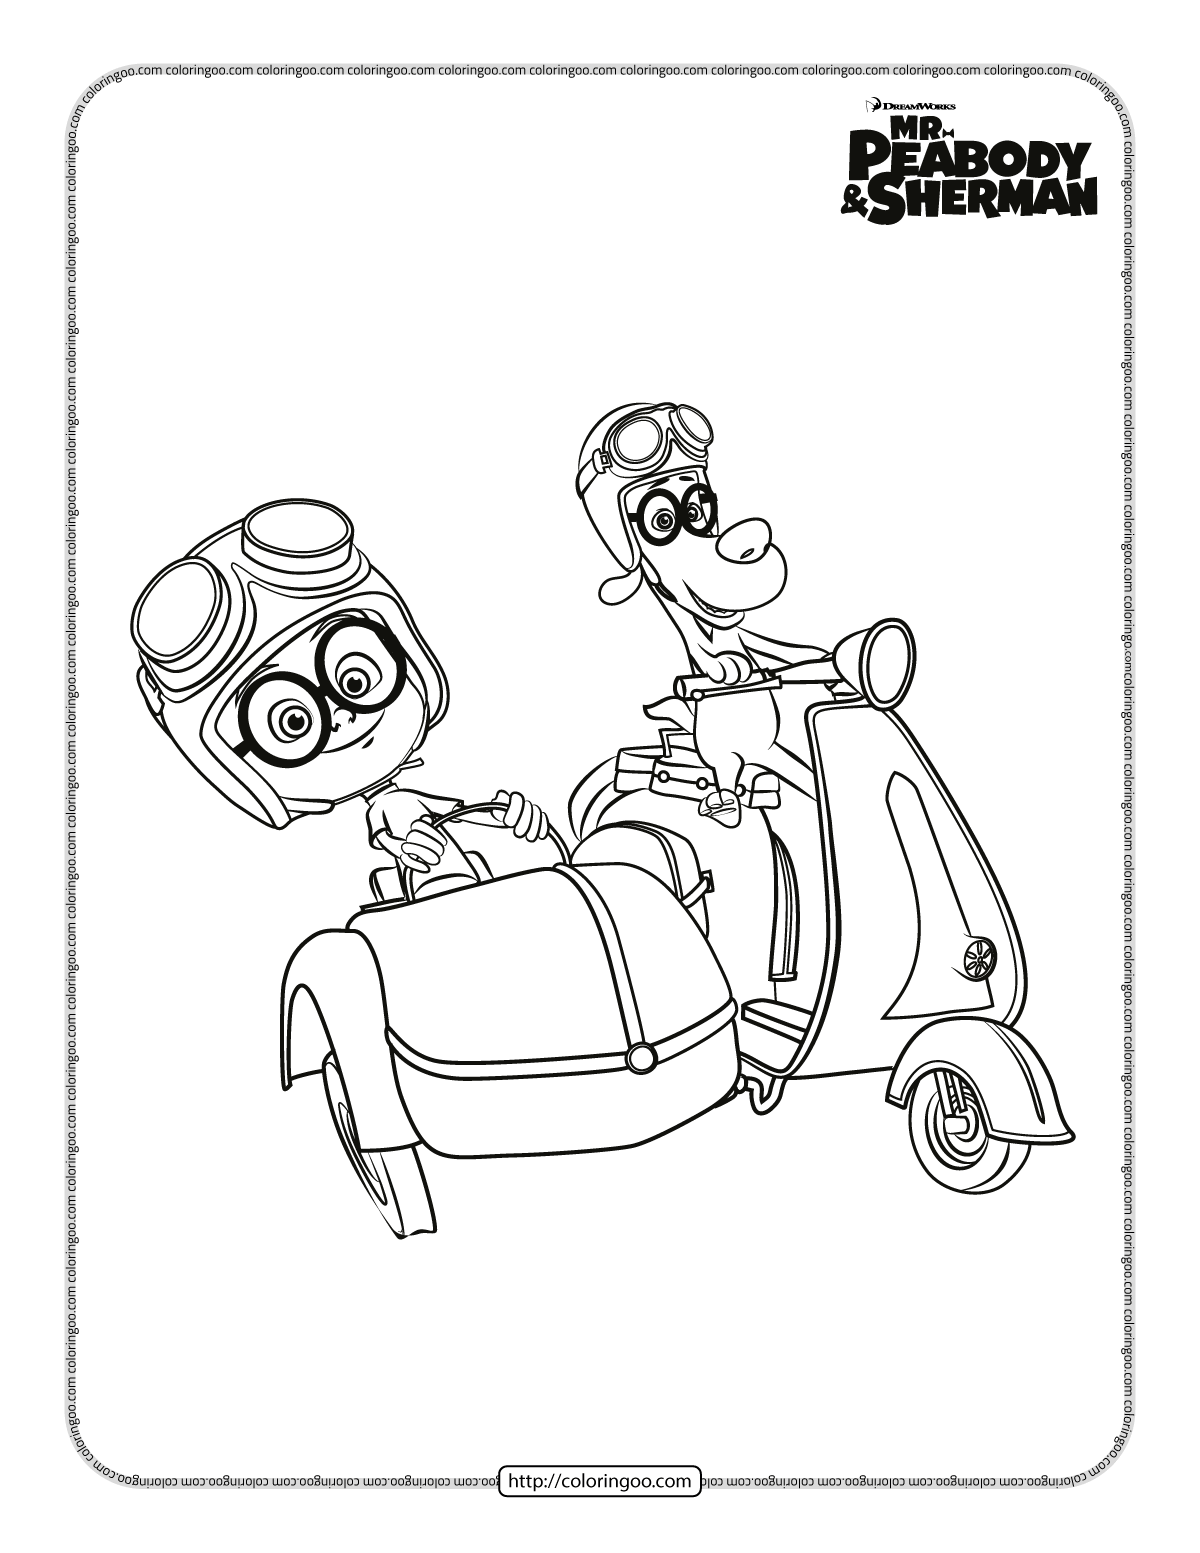 mr peabody and sherman pdf coloring activities